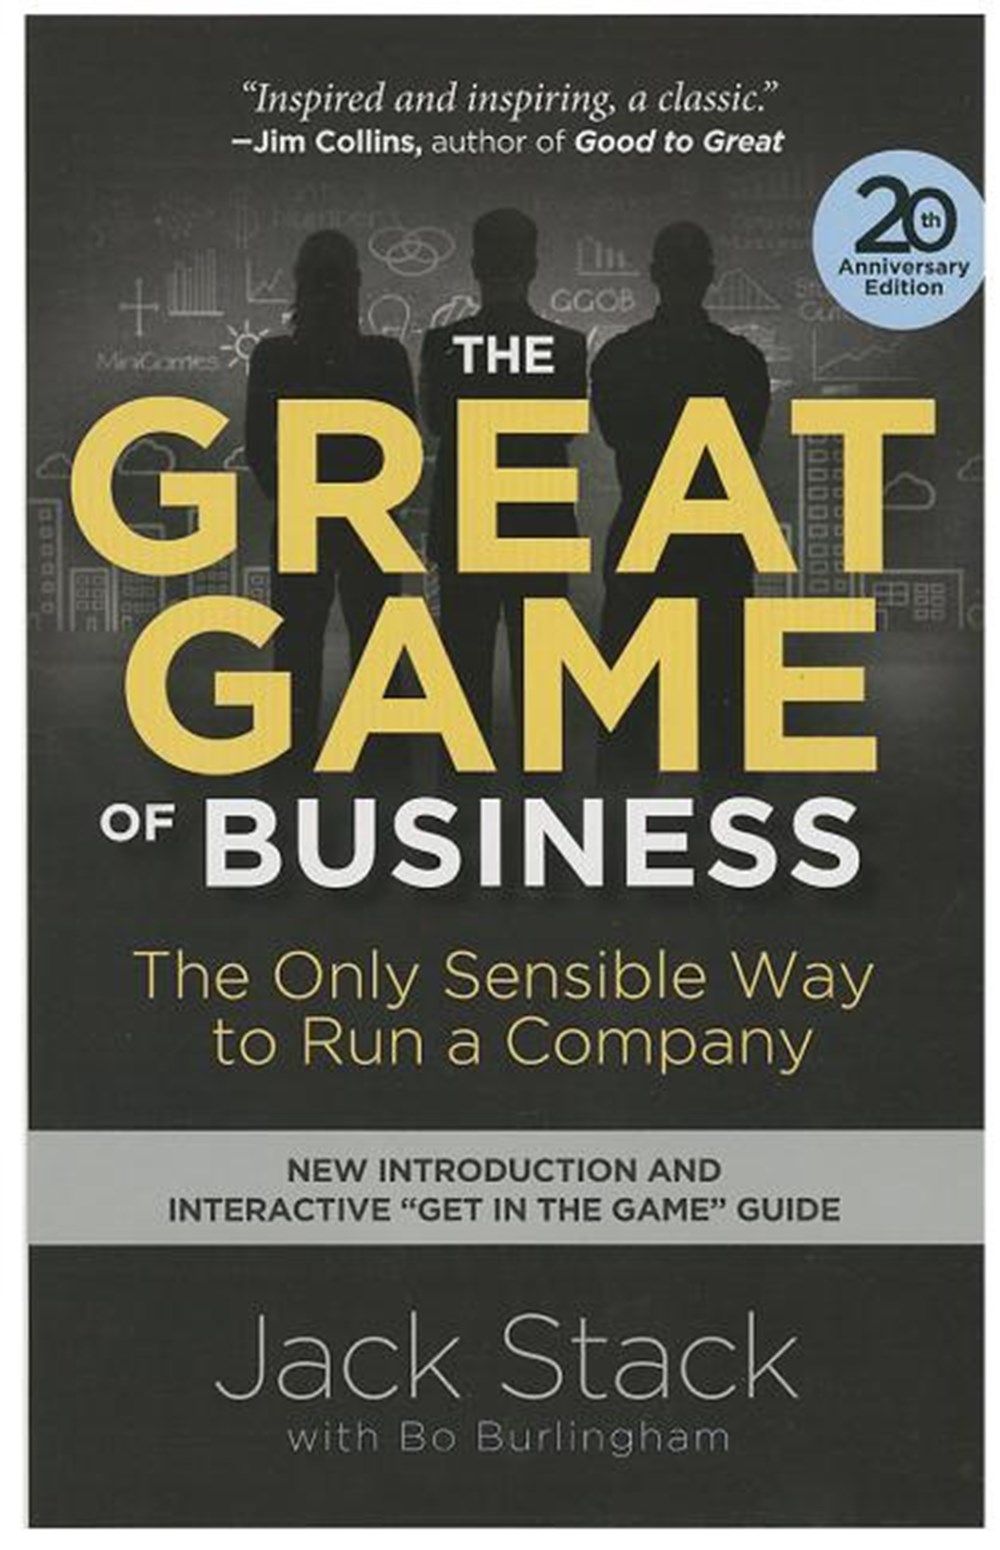 Great Game of Business: The Only Sensible Way to Run a Company (Revised, 20th Anniversary)